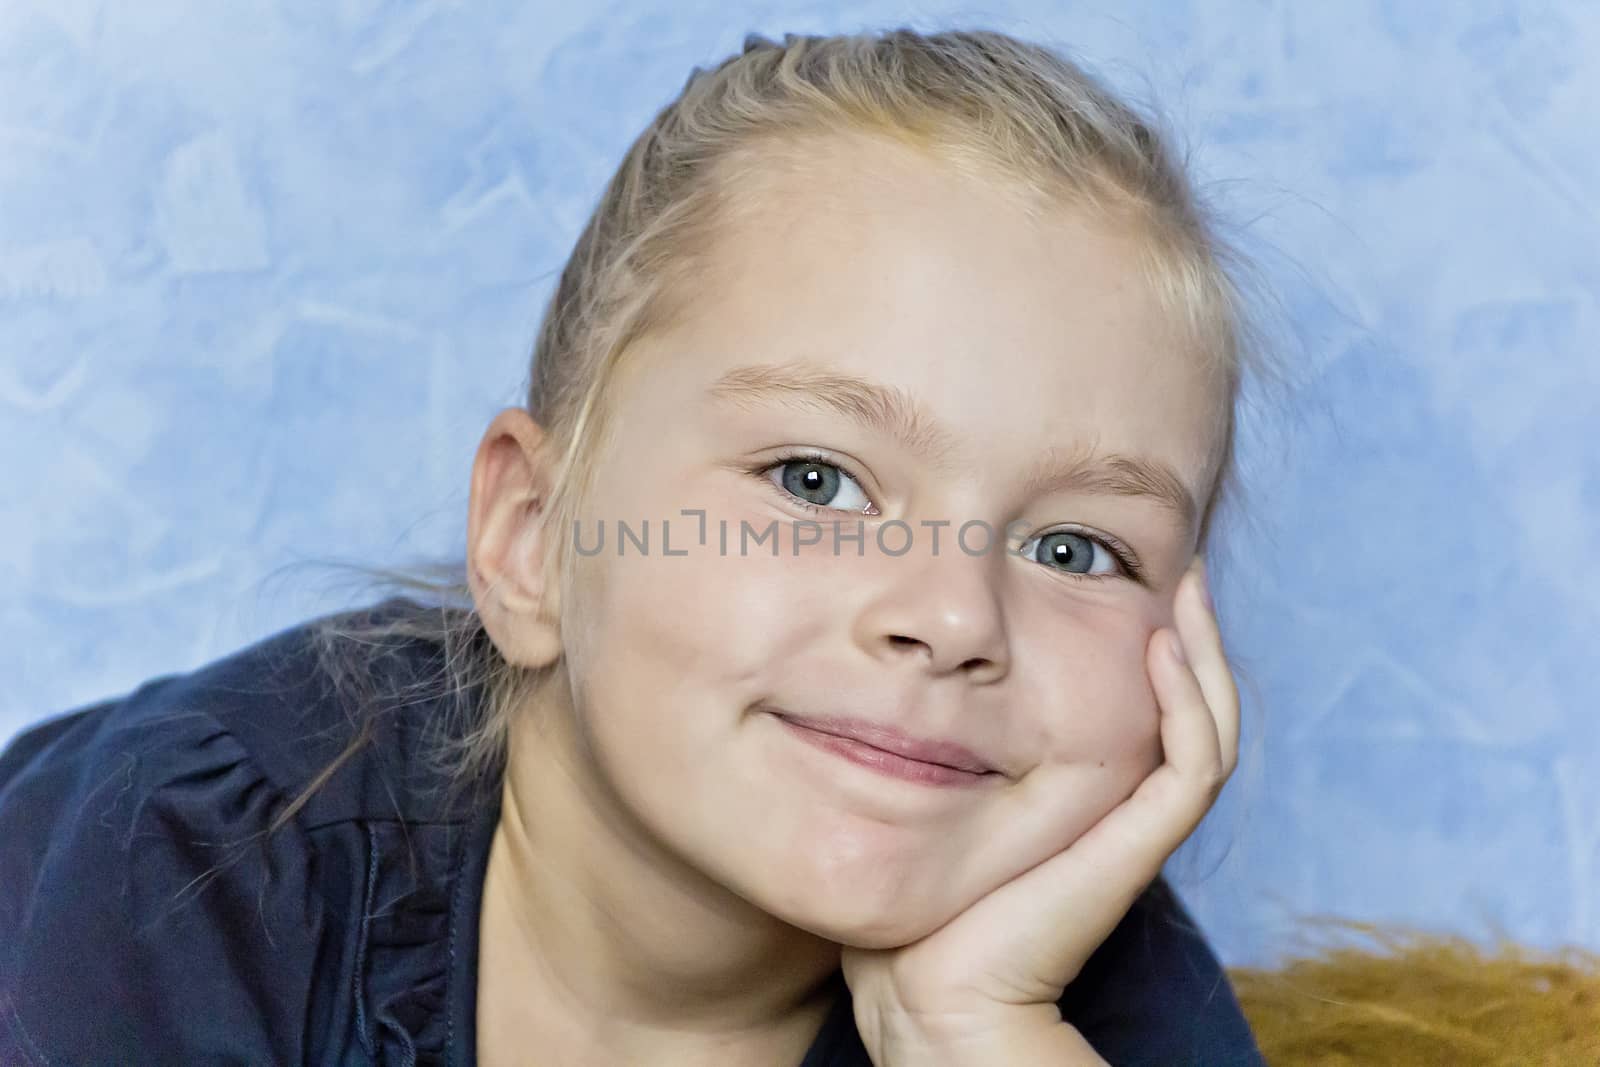 Cute smiling girl with blond hair on blue background